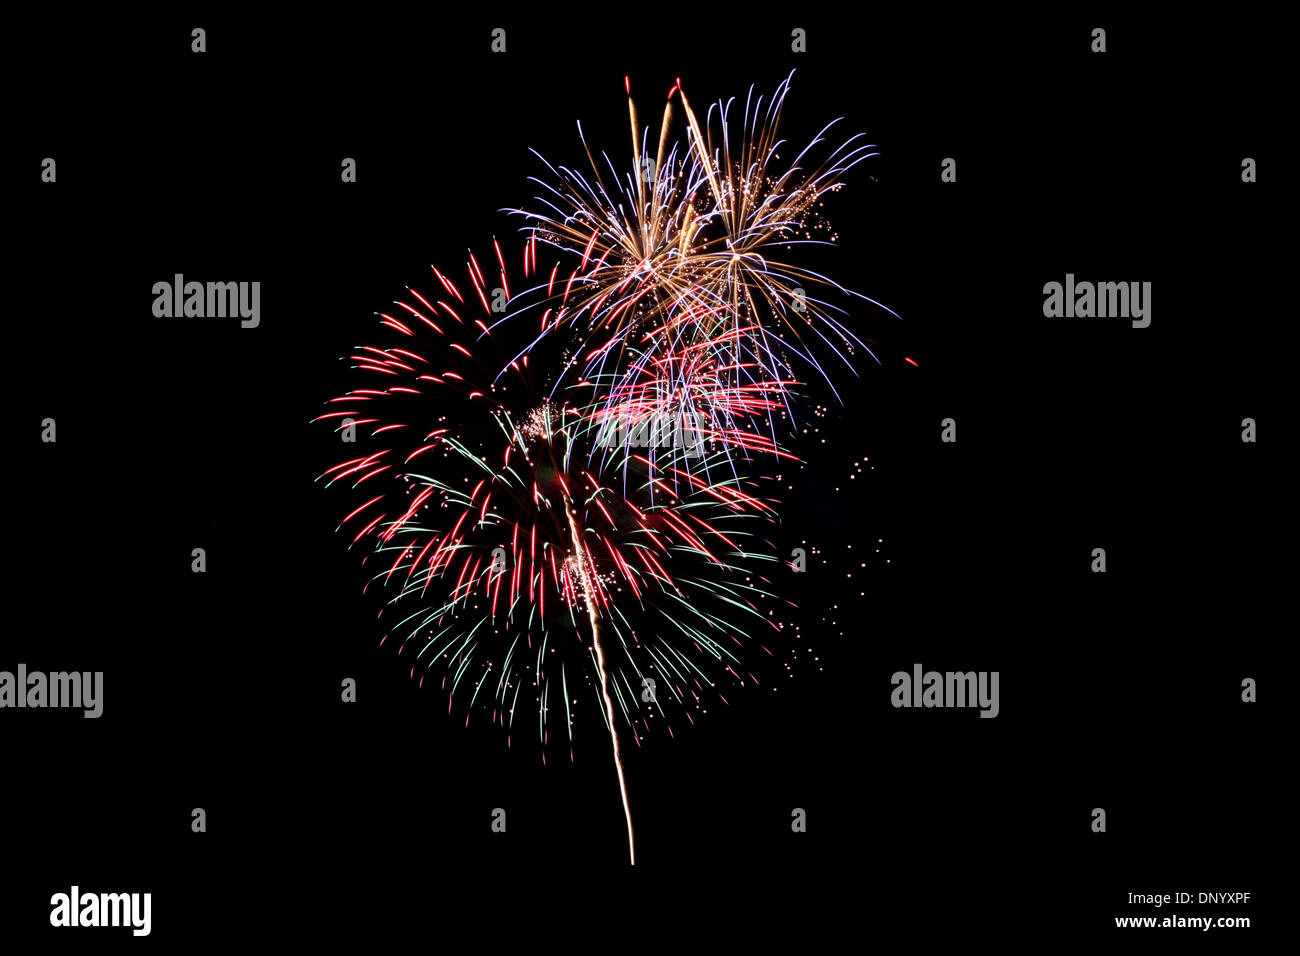 Variety of colors Fireworks or firecracker in the darkness. Stock Photo